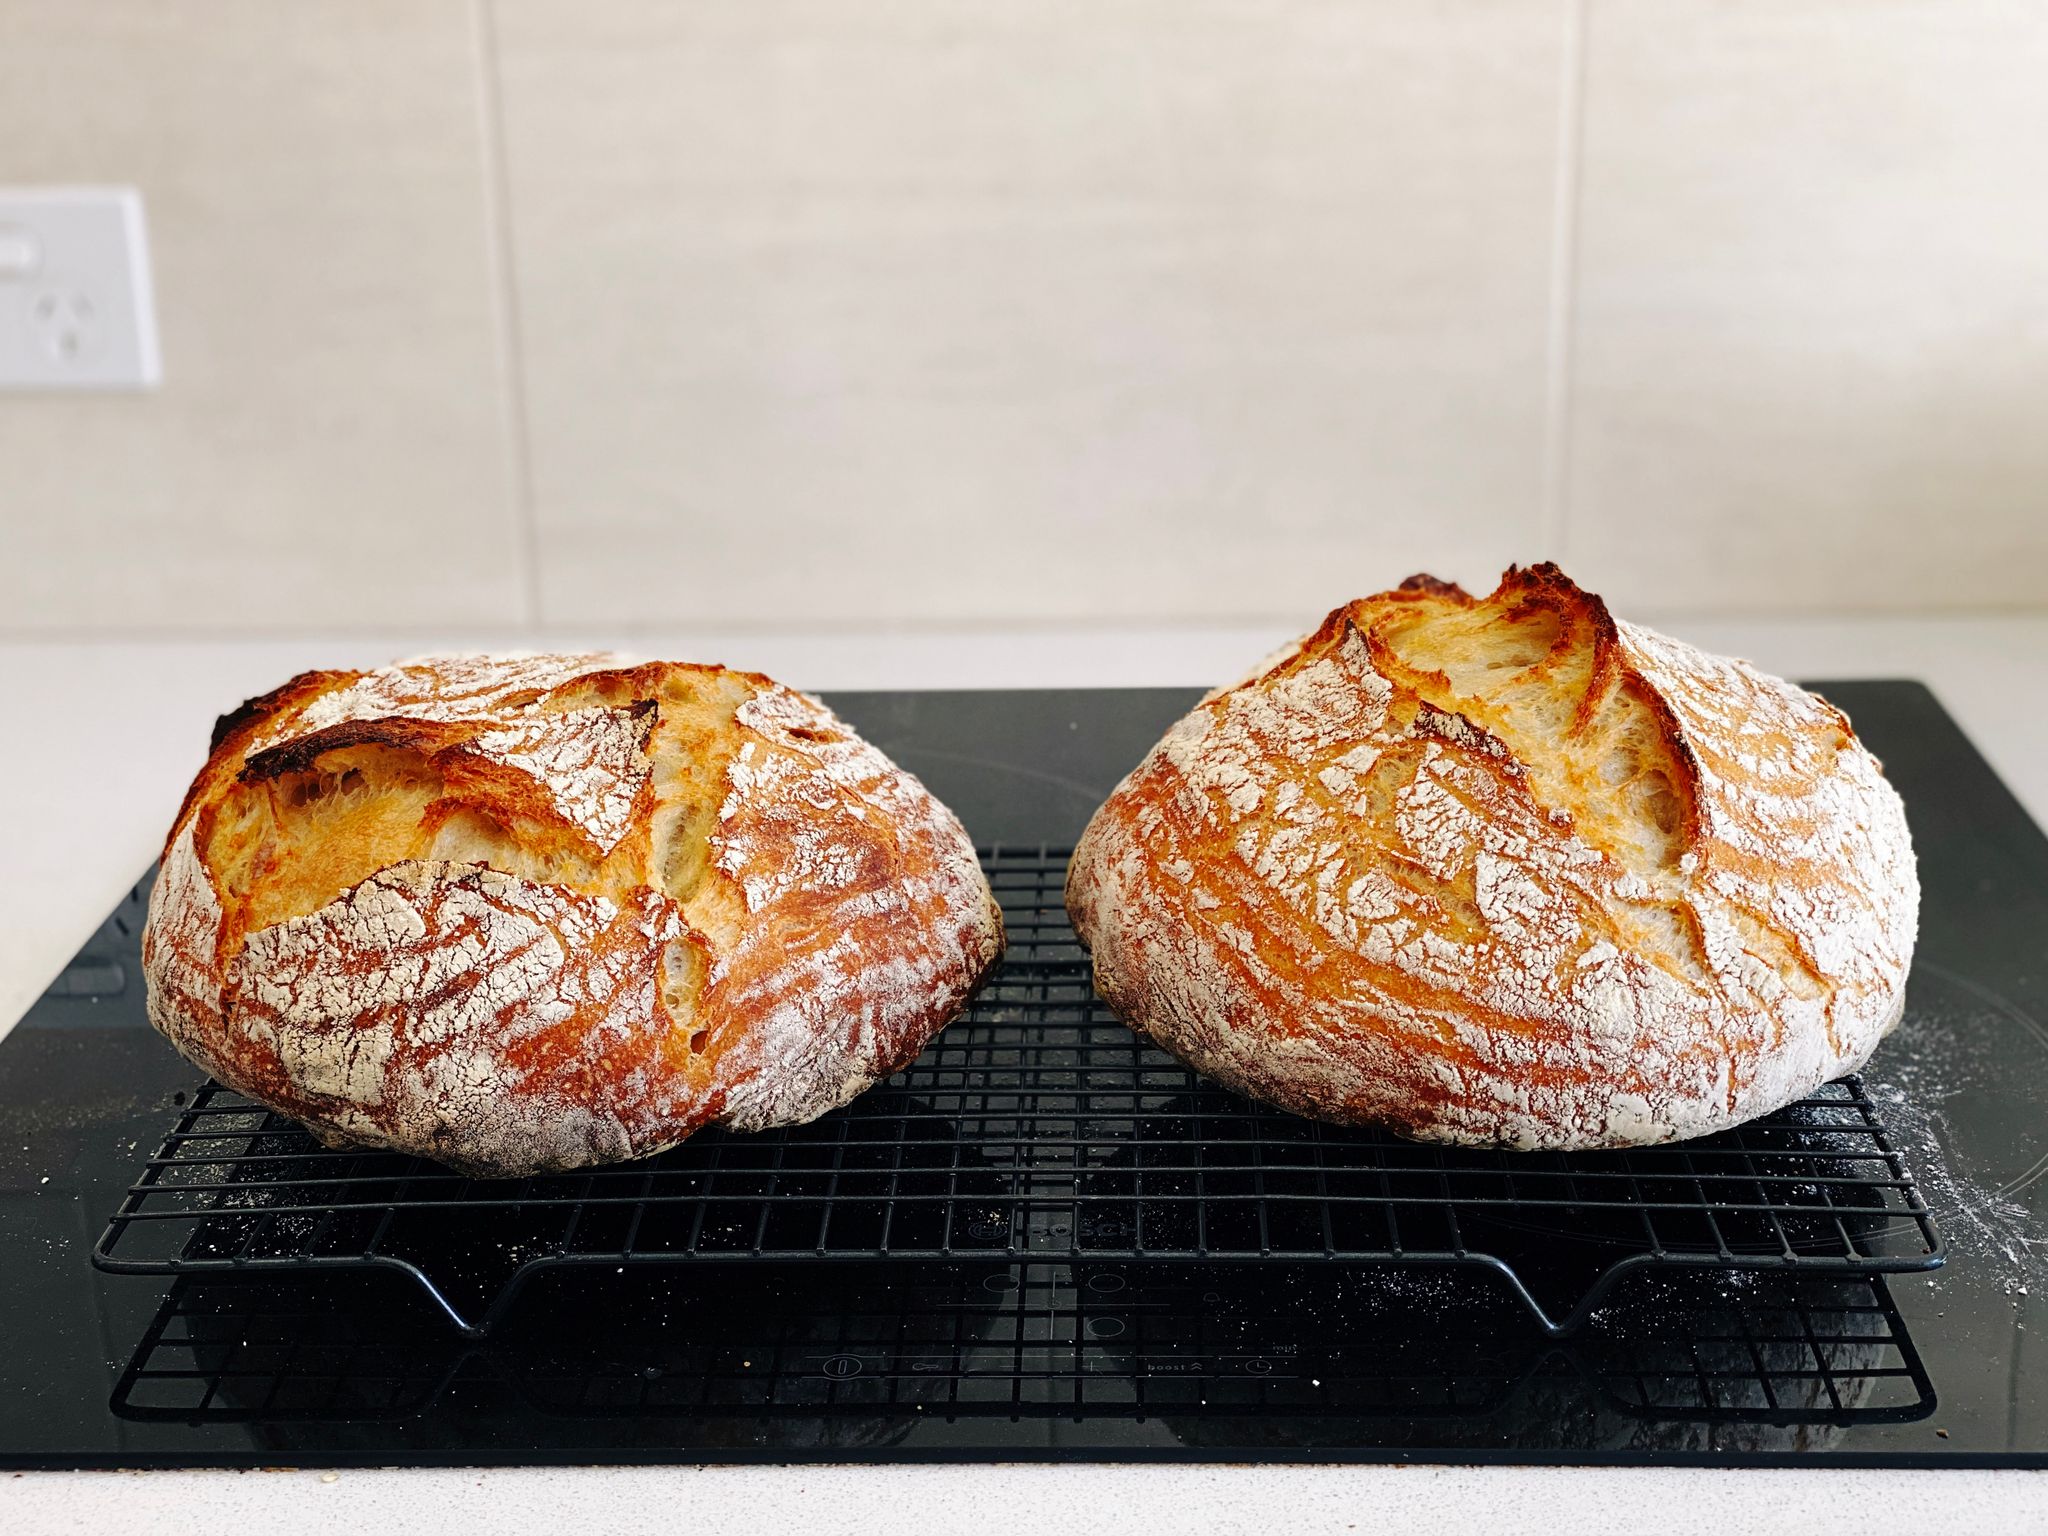 Two round golden brown loaves of bread sitting on a cooling rack.